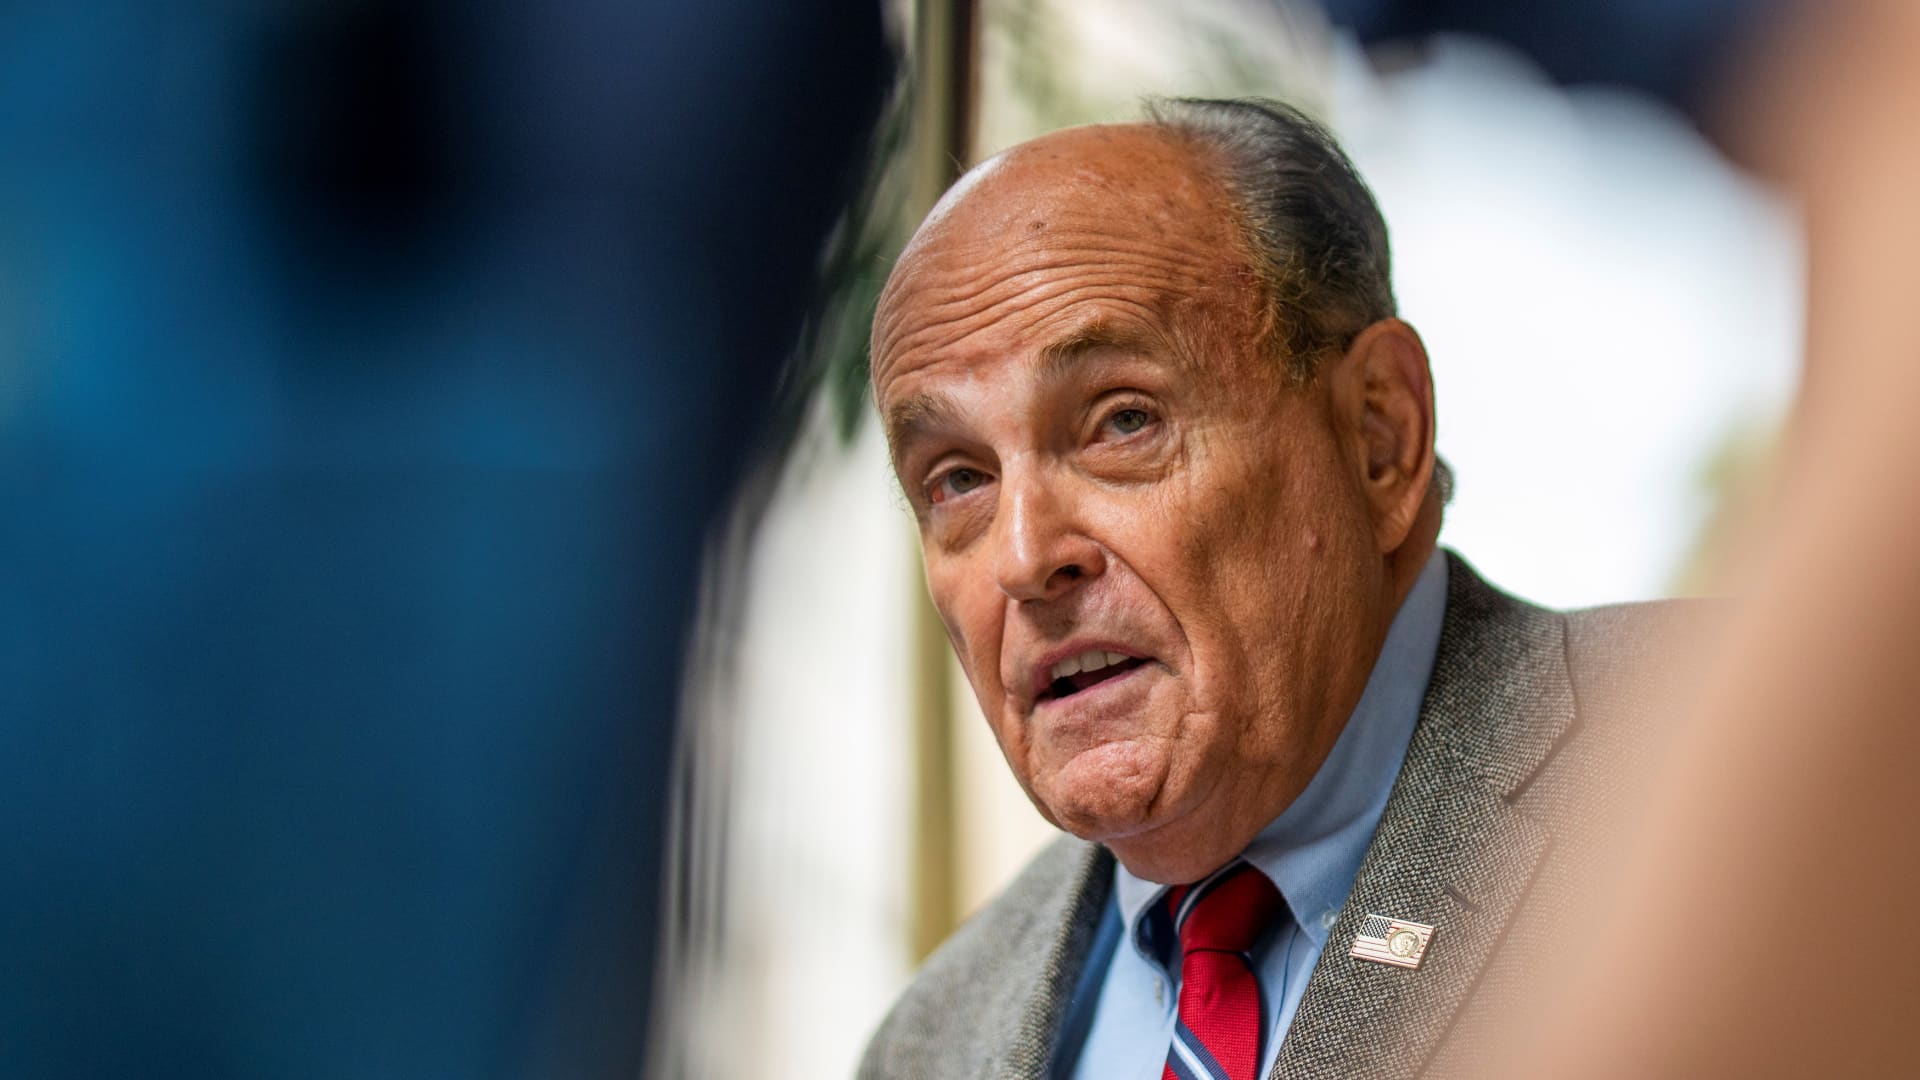 Giuliani interviewed for hours by 1/6 committee